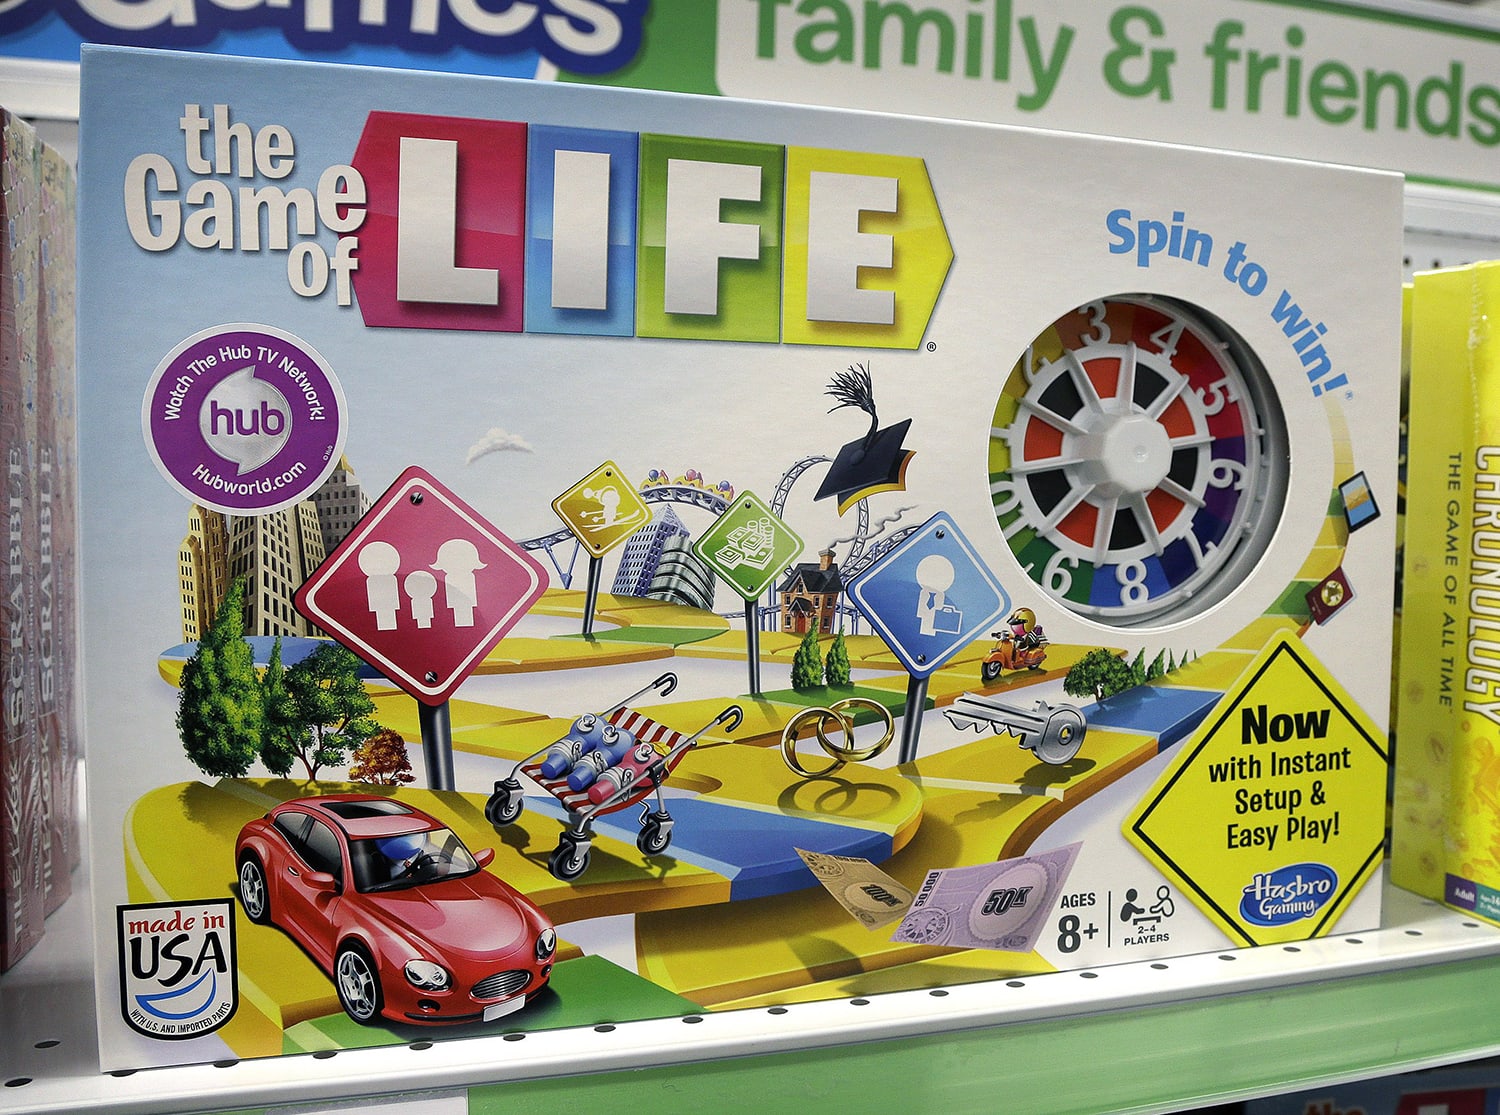 Hasbro Gaming The Game of Life Board Game